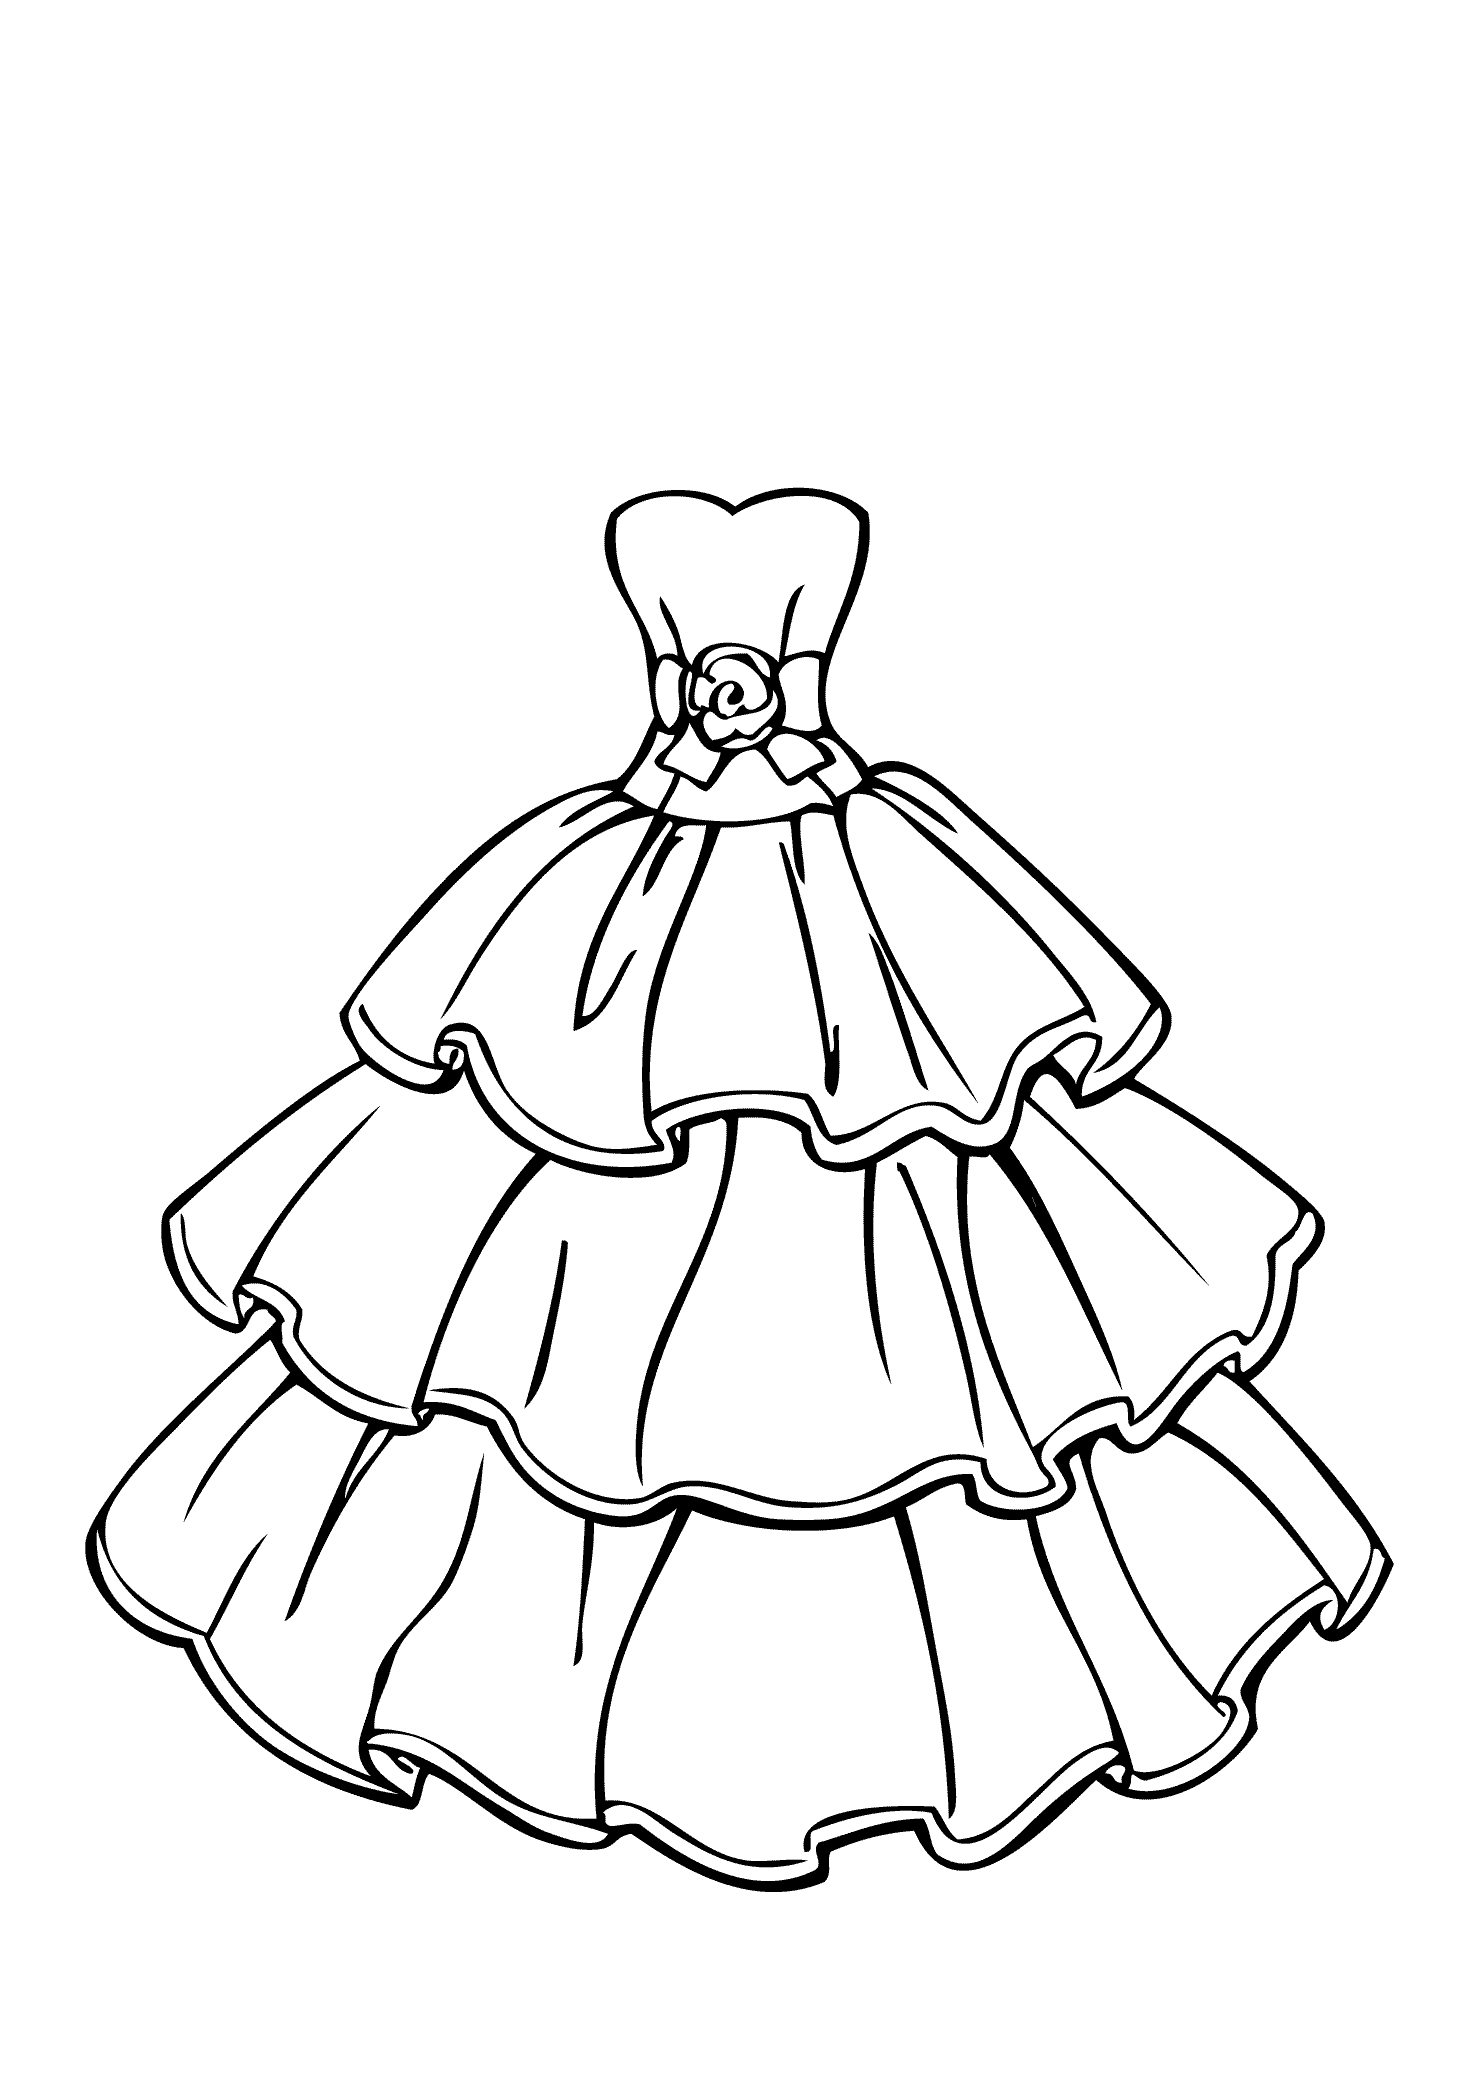 Clothing Dress Coloring For Adults Art Pages | Coloring pages, Coloring for adults and Coloring books - Clothing Dress Coloring For Adults Art Pages on ... - Dress Coloring Sheets